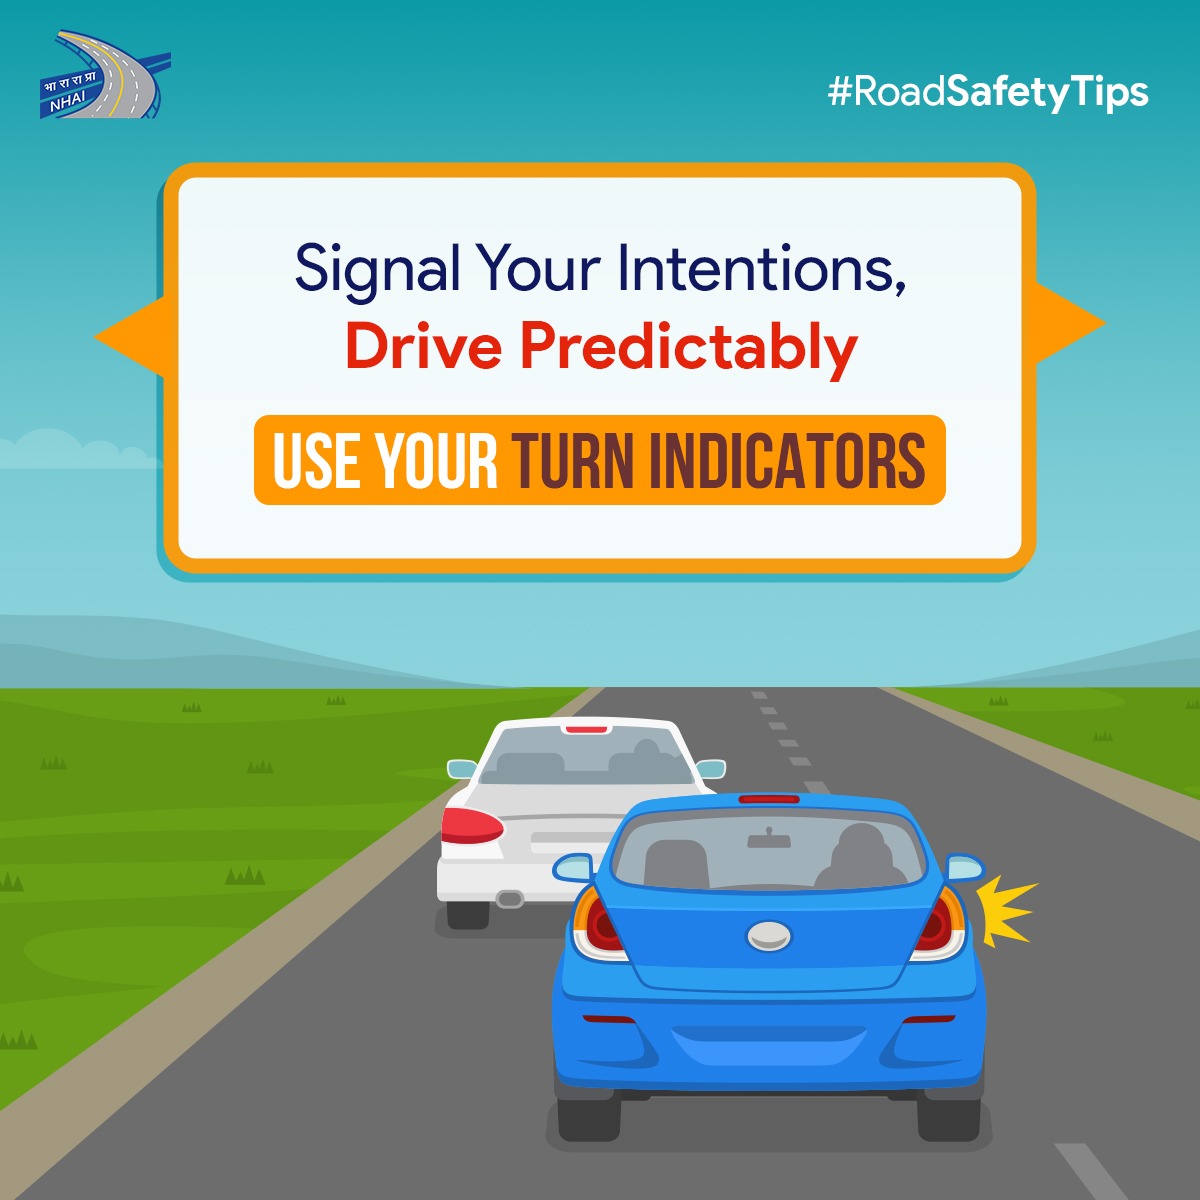 #UseYourSignals: Signal your lane changes by using the left or right turn indicators to avoid surprises and keep the road safe & predictable for all road users. #NHAI #RoadSafetyTips